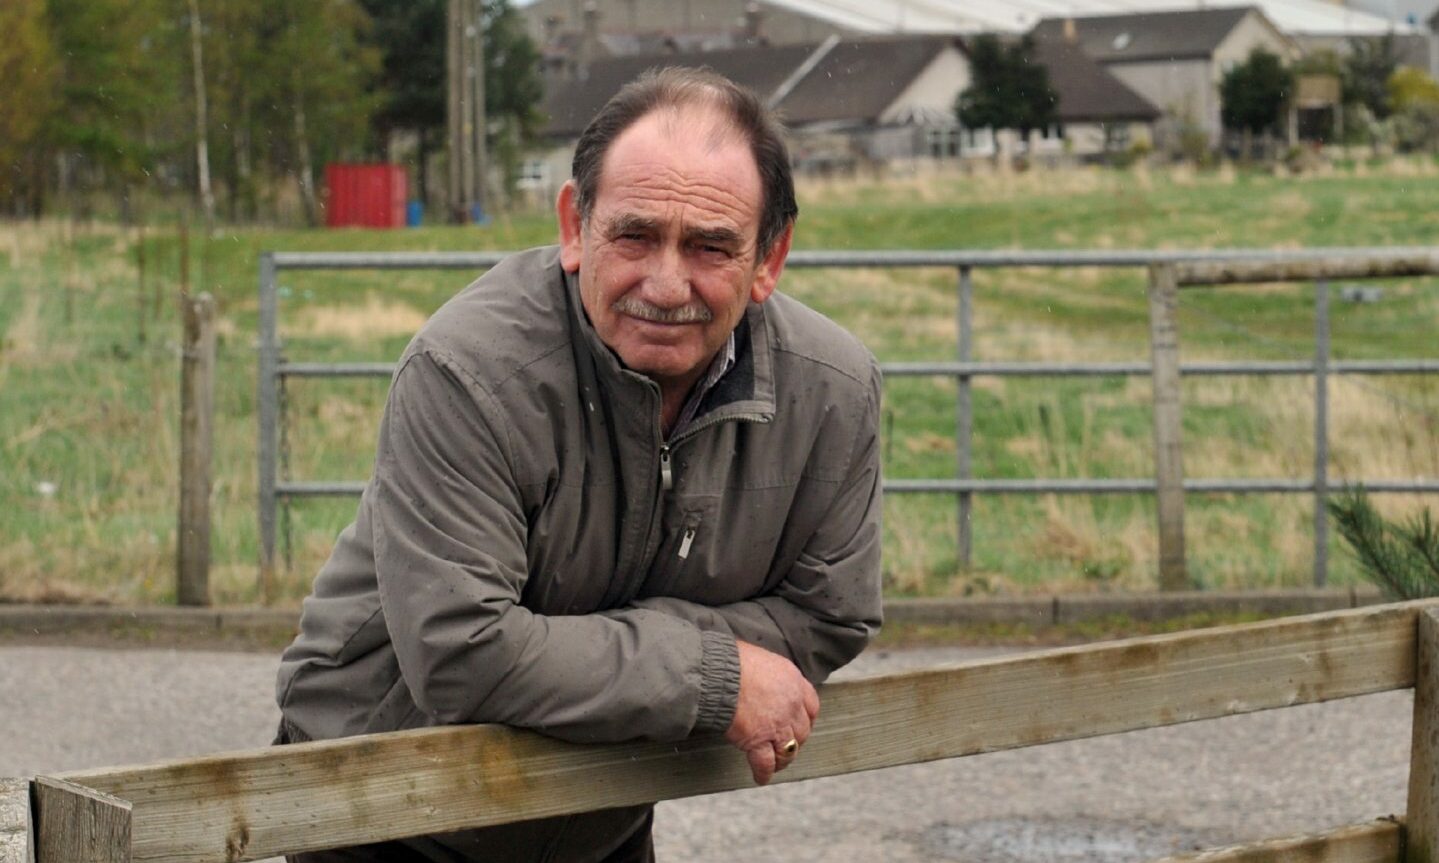 Alastair Kennedy leaning on a fence at the old mart in Elgin with grass behind him. 